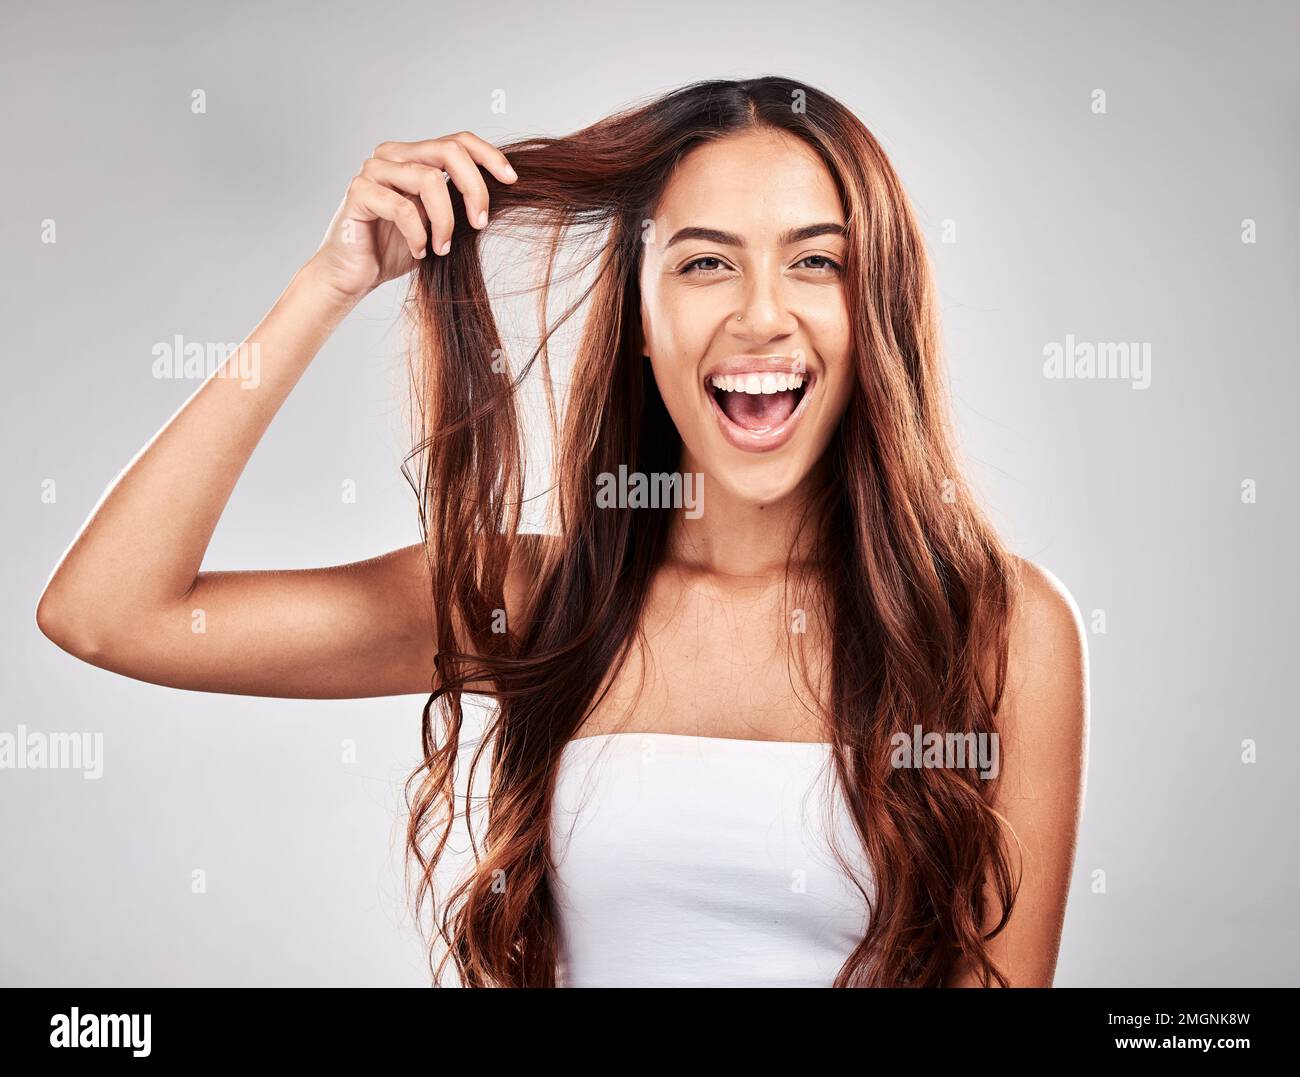 Hair, portrait and face of excited woman for skin care, makeup and cosmetics with smile in studio. Headshot of aesthetic model person happy about Stock Photo